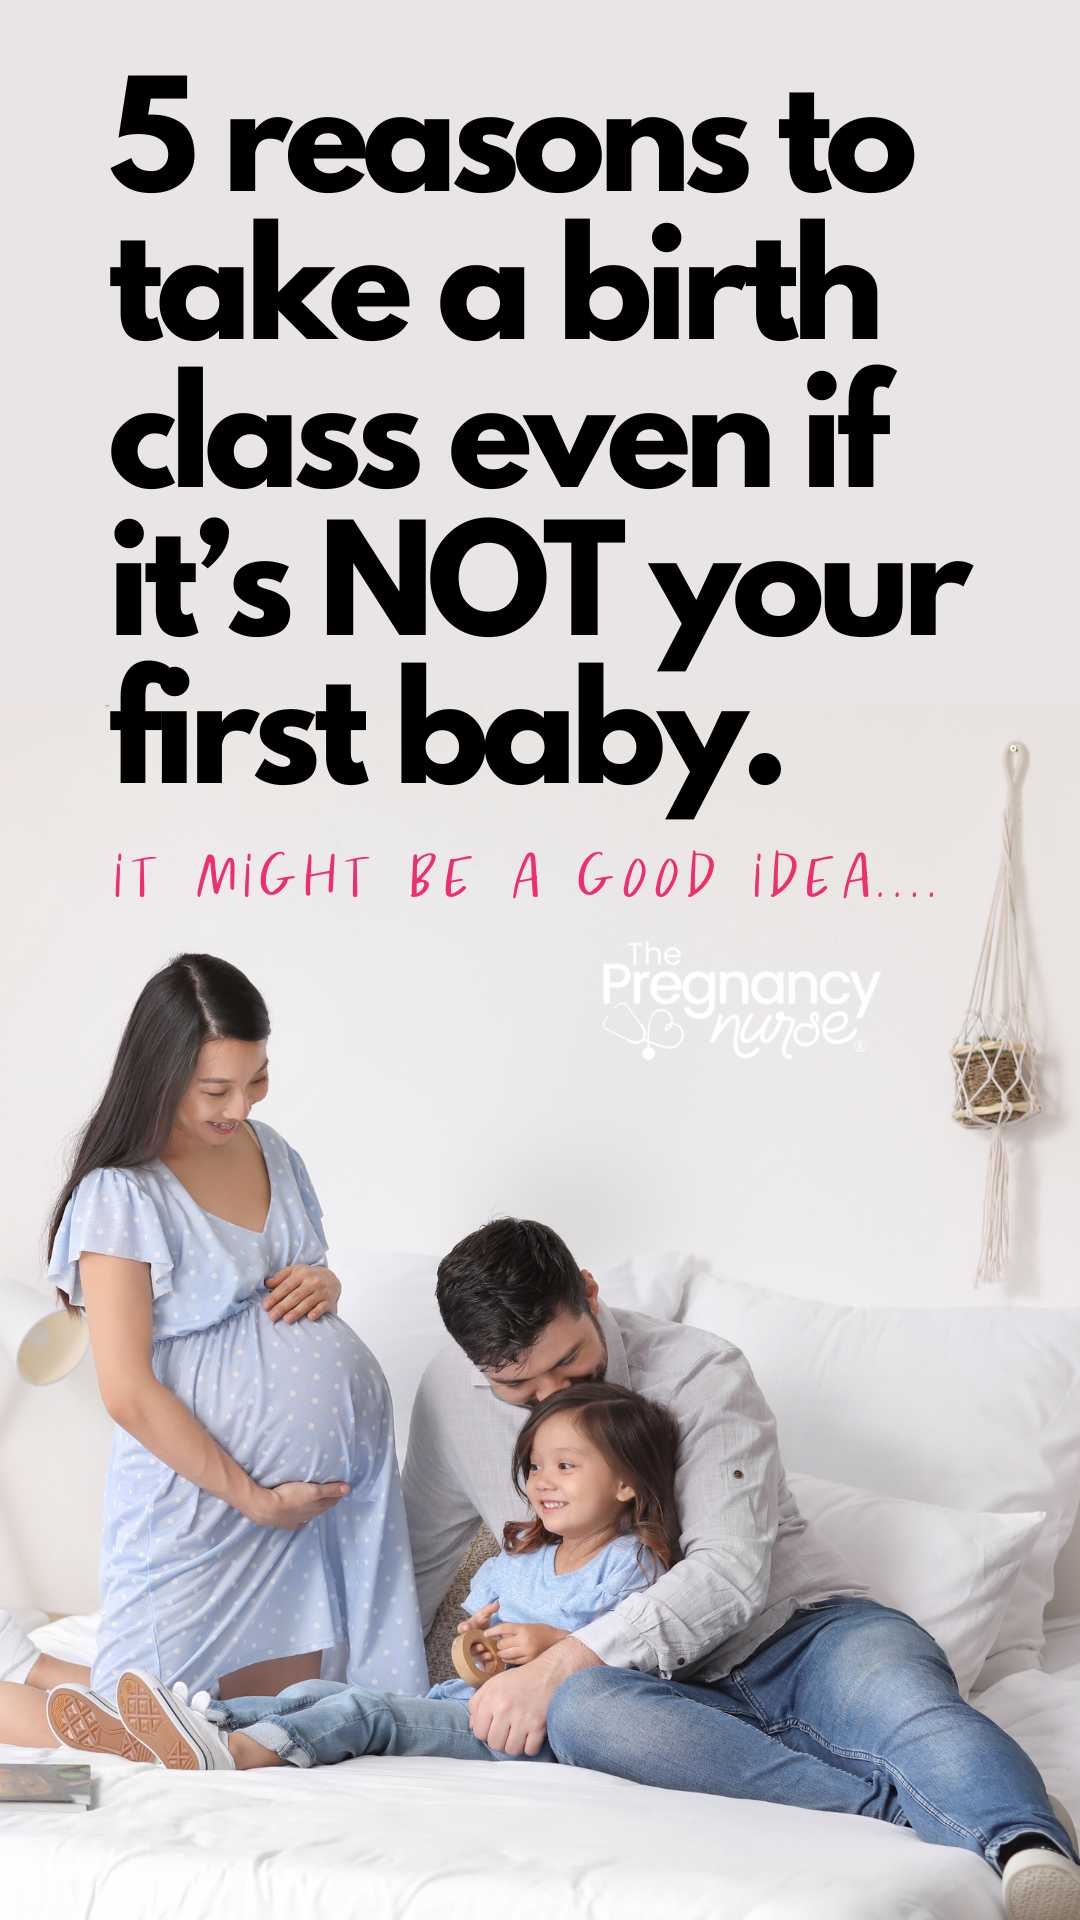 pregnant family / 5 reasaons to take a birth class even if it's NOT your first baby.